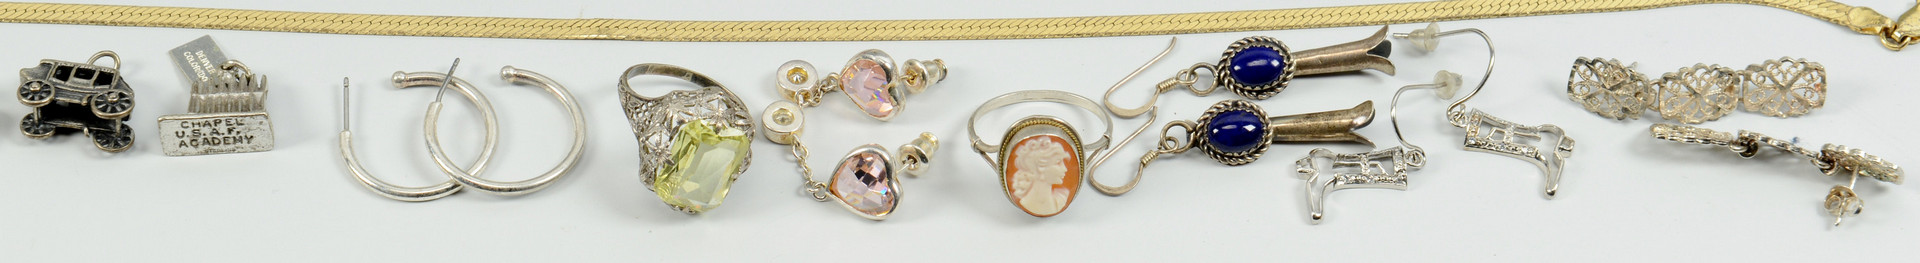 Lot 680: Large Group of Sterling Jewelry